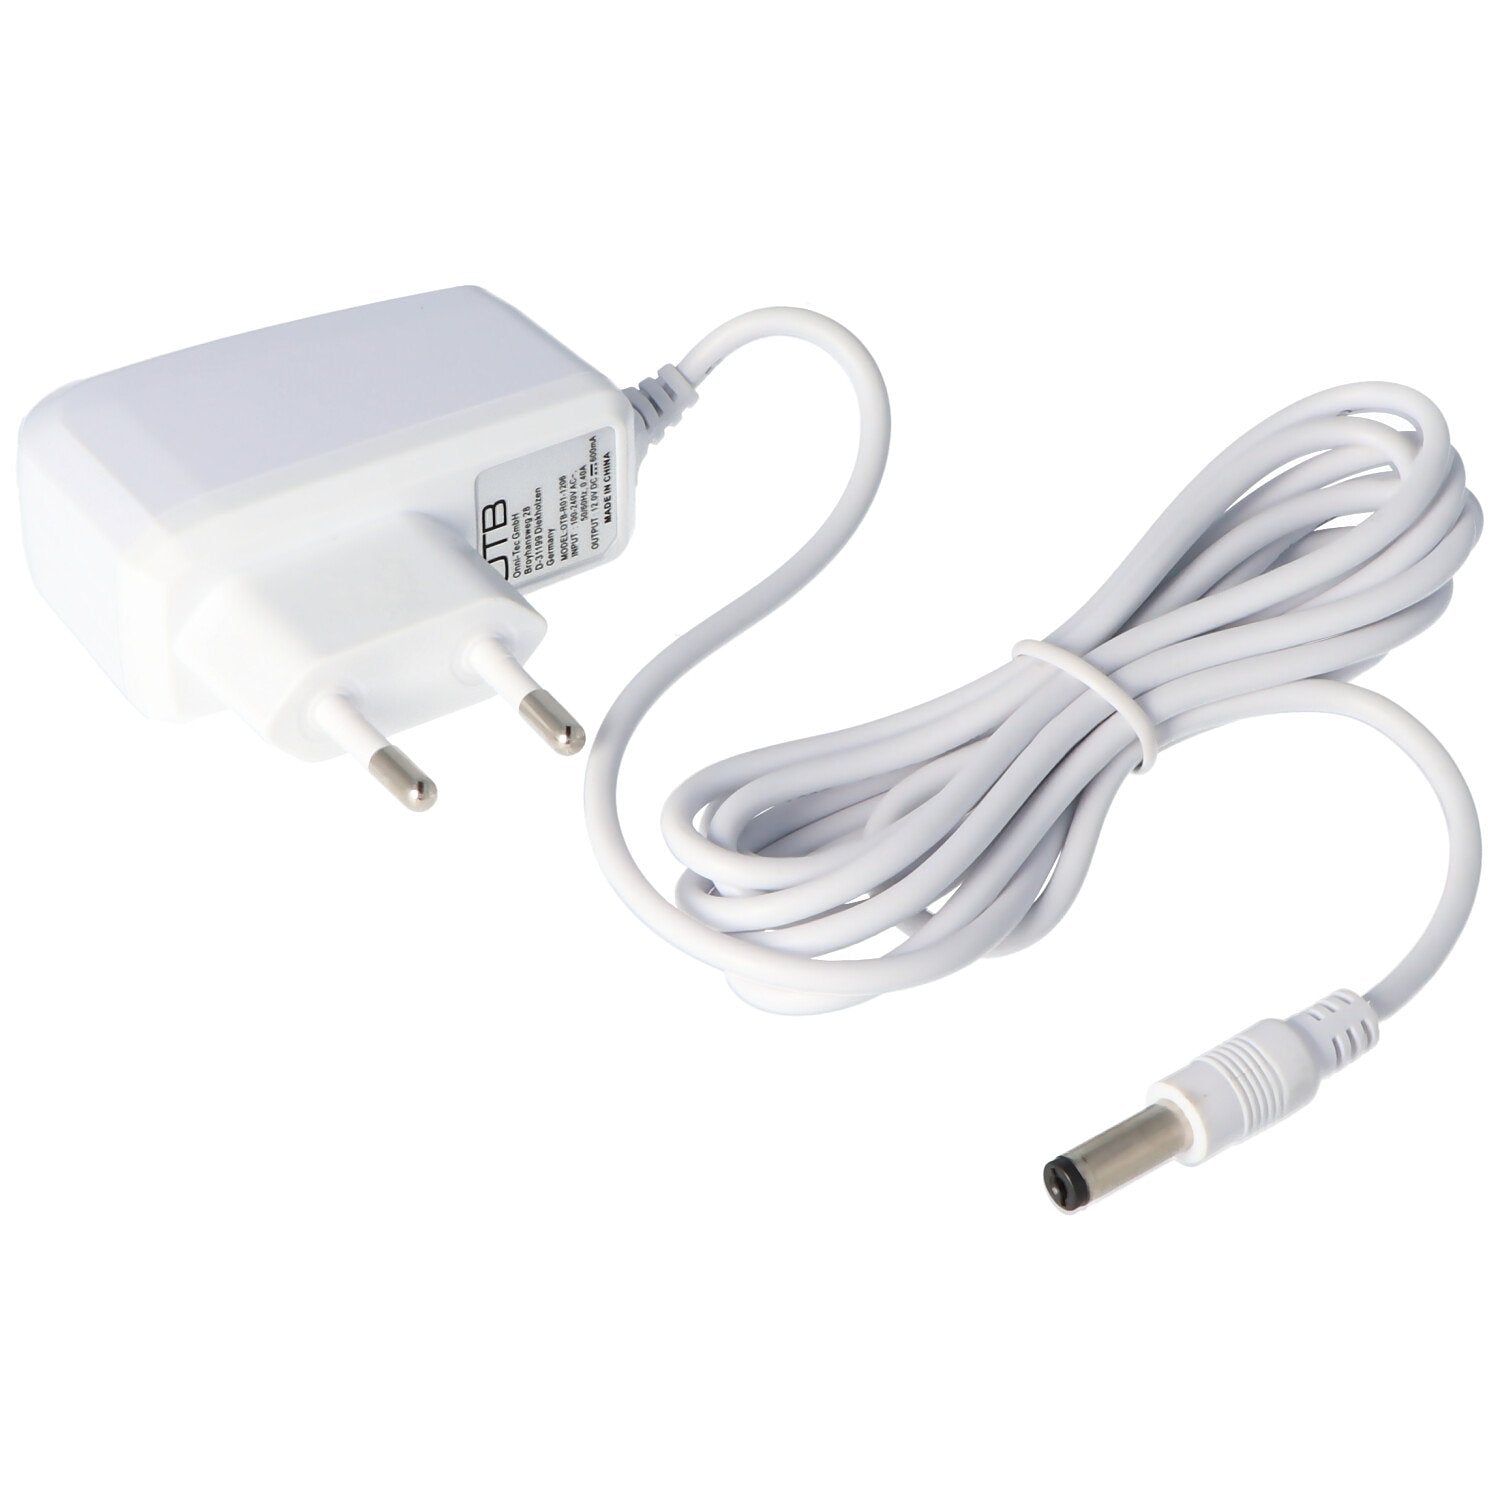 Power adapter white suitable for Tivoli Audio PAL, iPAL radio 12 volt, charging current 56